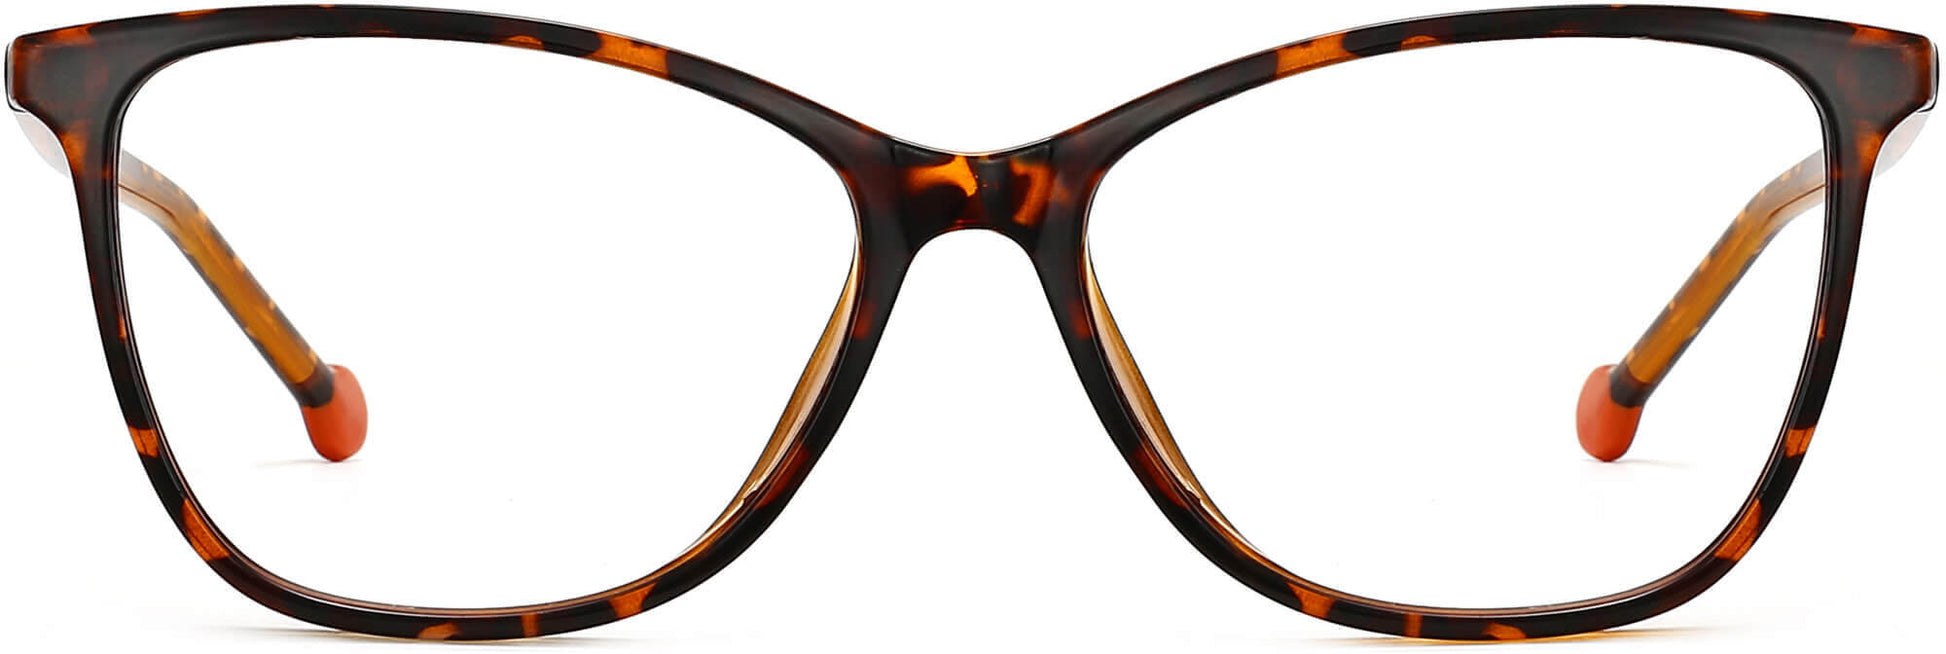 Janice Cateye Tortoise Eyeglasses from ANRRI, front view